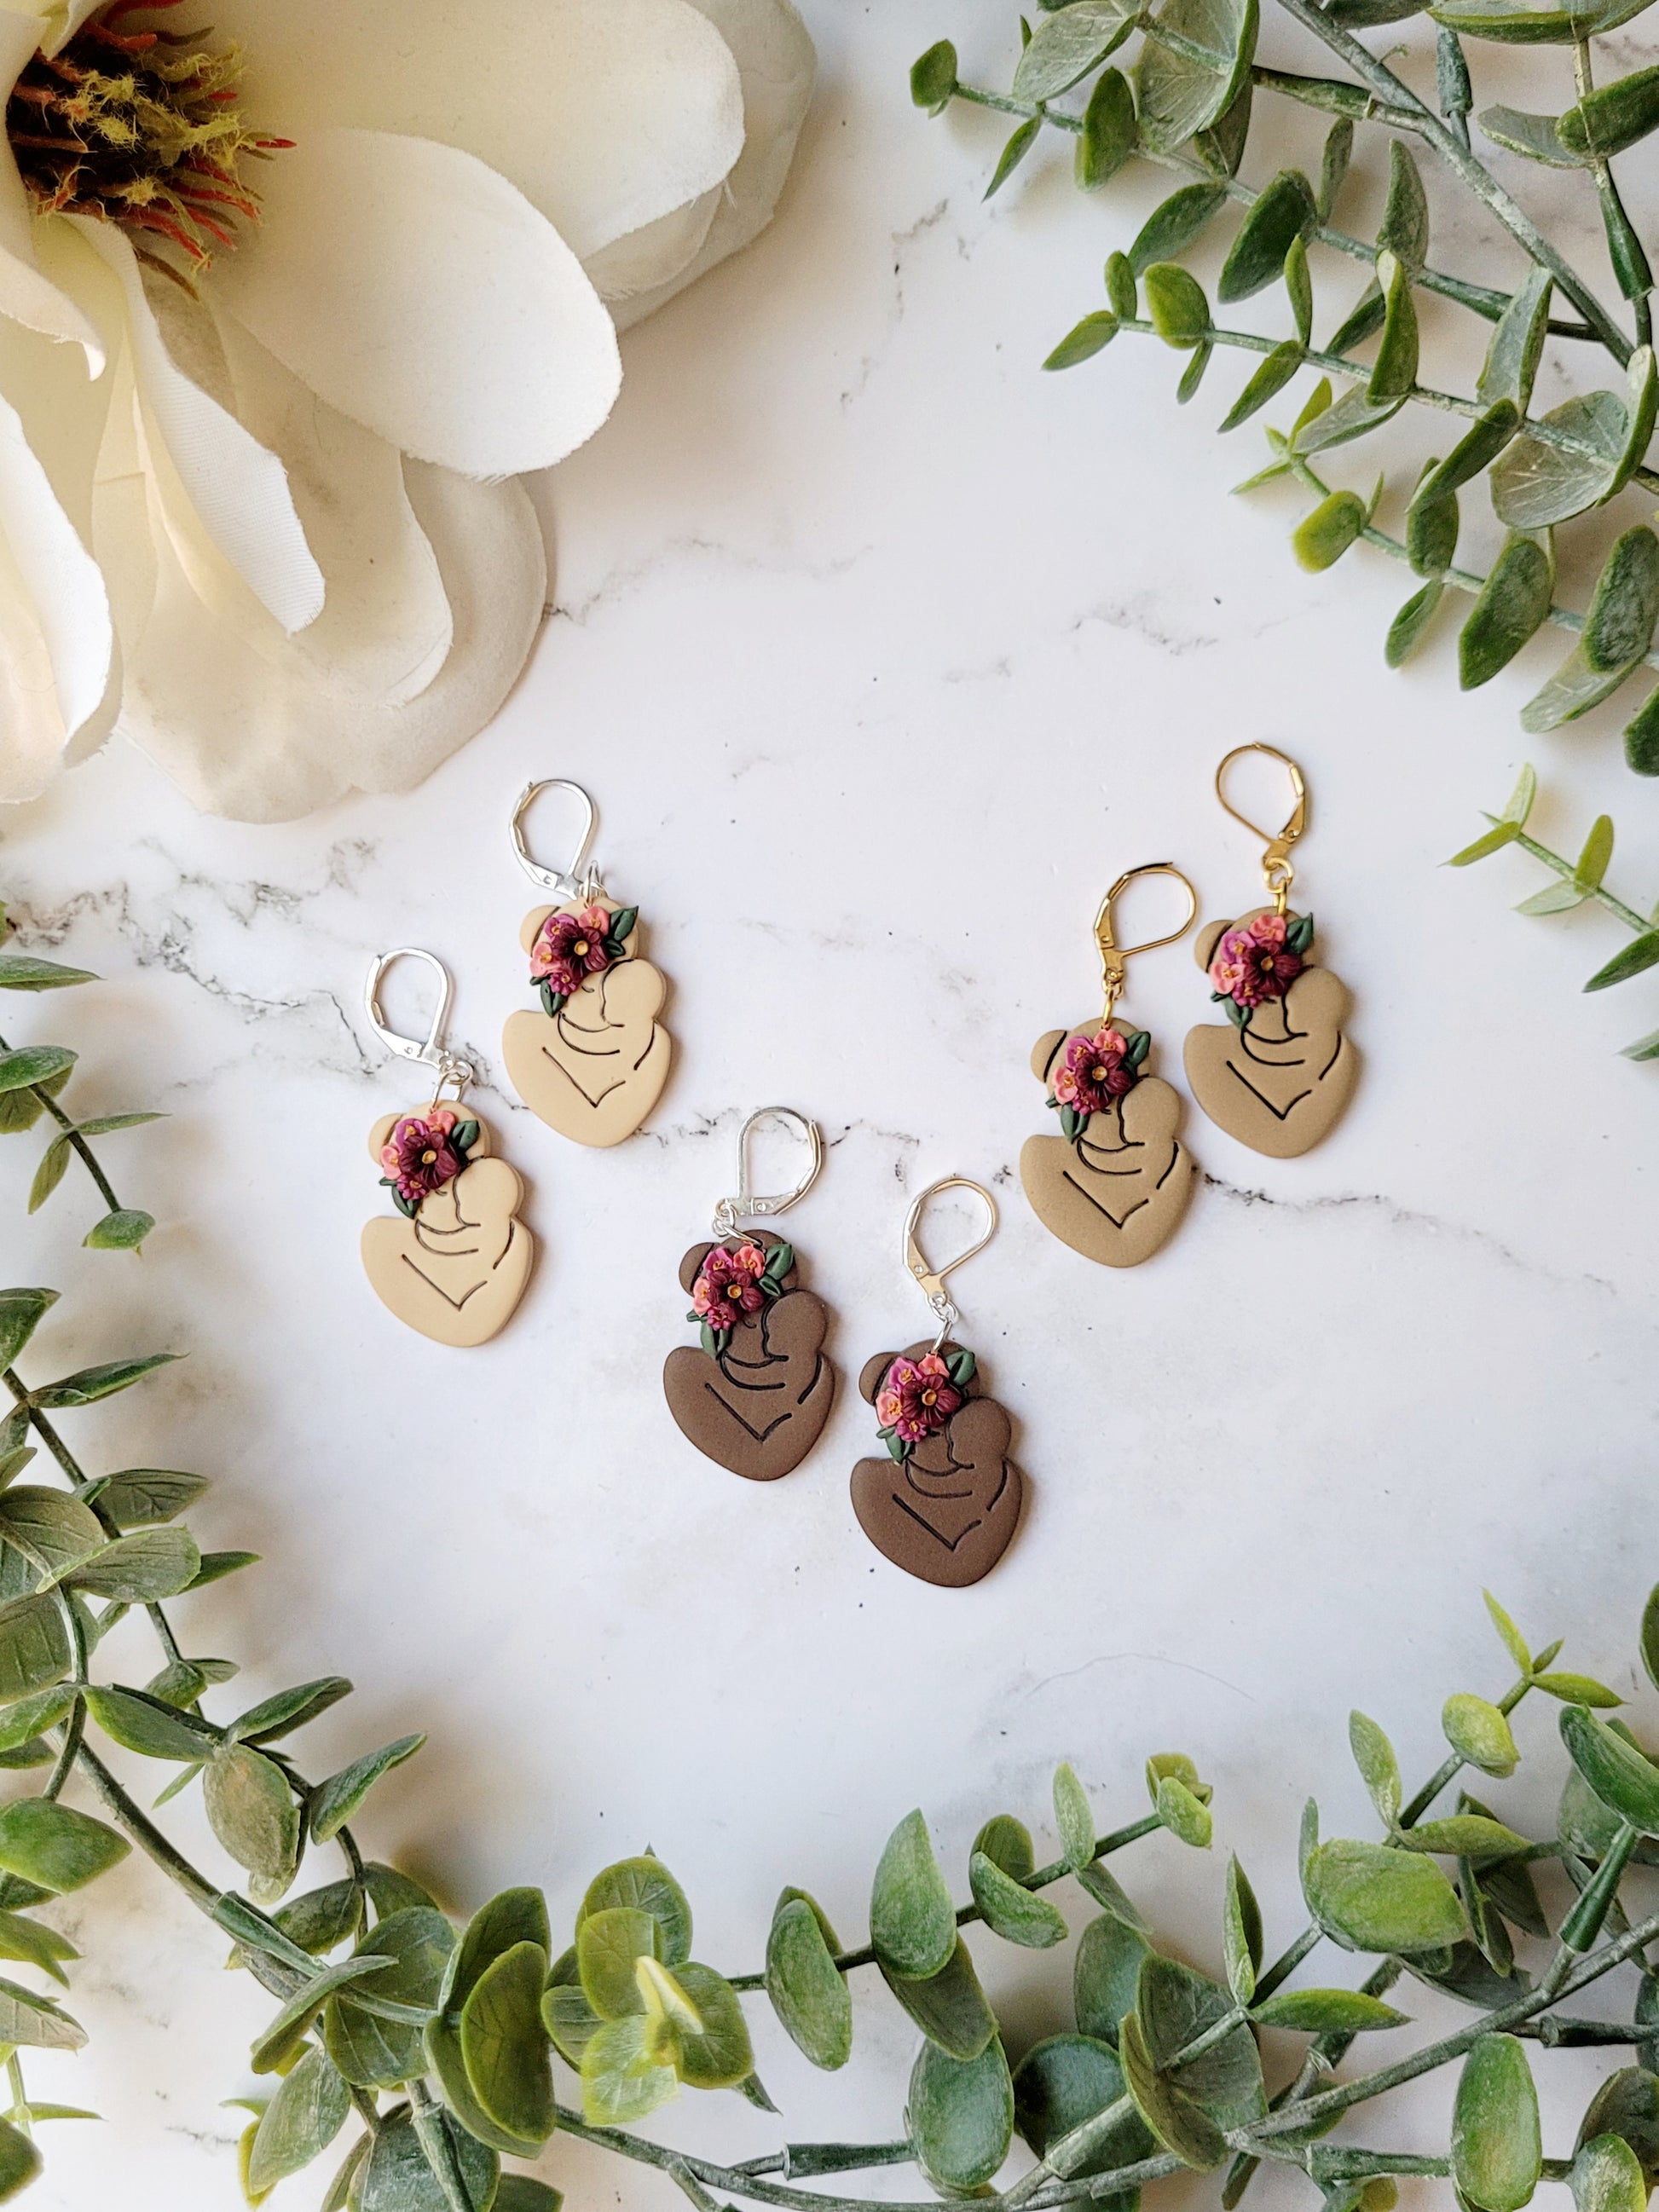 3 skin tones of mother with child earrings on a marble background.